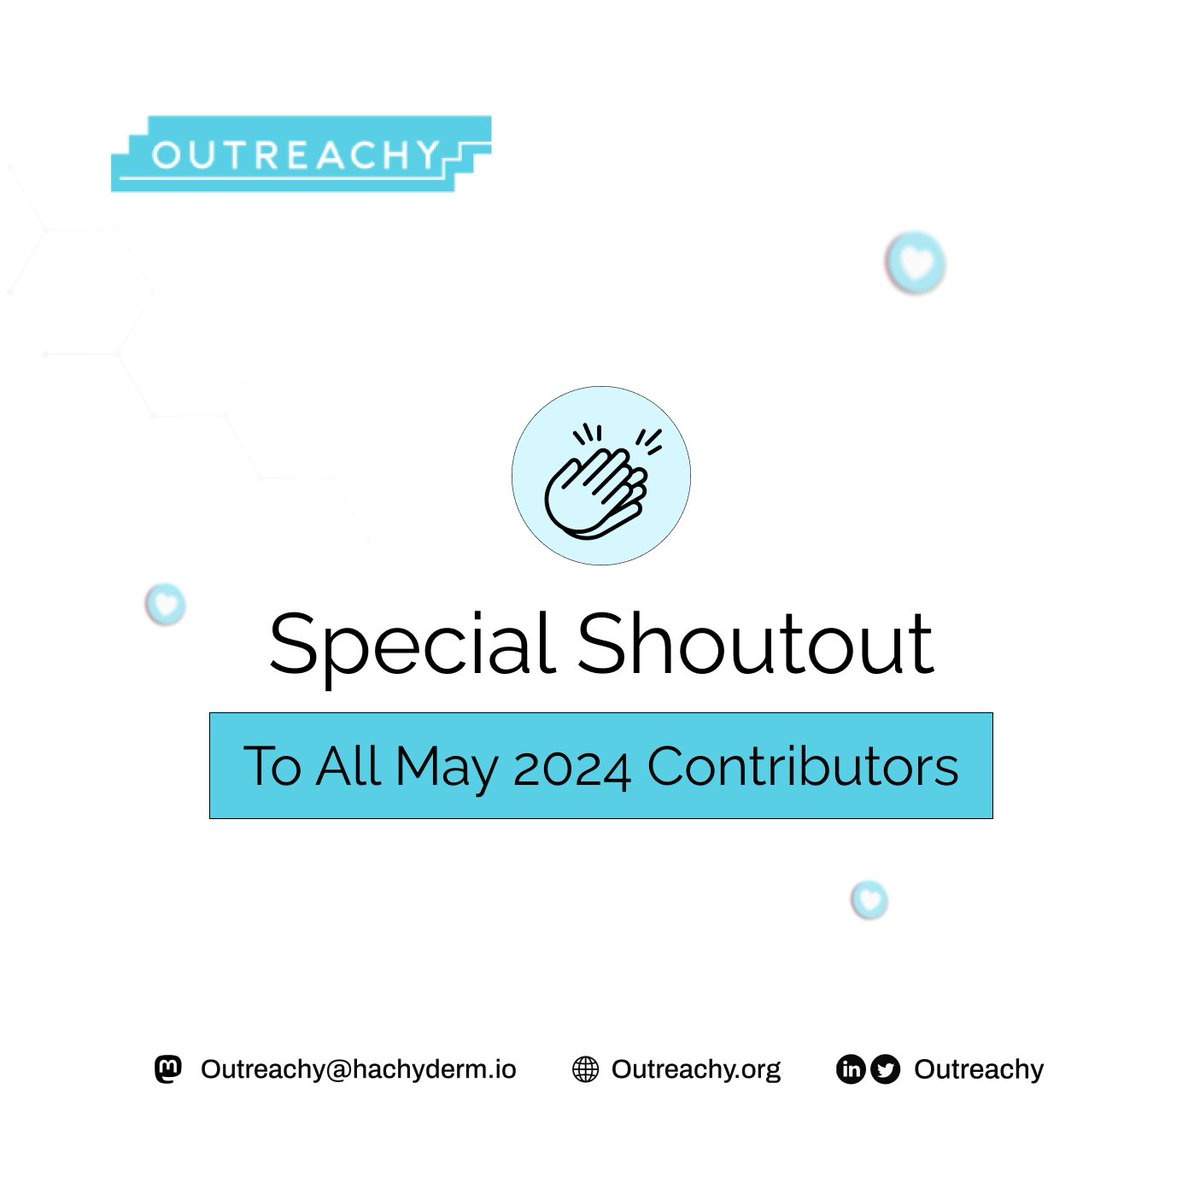 What should we say about our courageous May 2024 applicants? You all are amazing! While we await the result of the May 2024 internship application, do not stop contributing to #FOSS projects and communities.